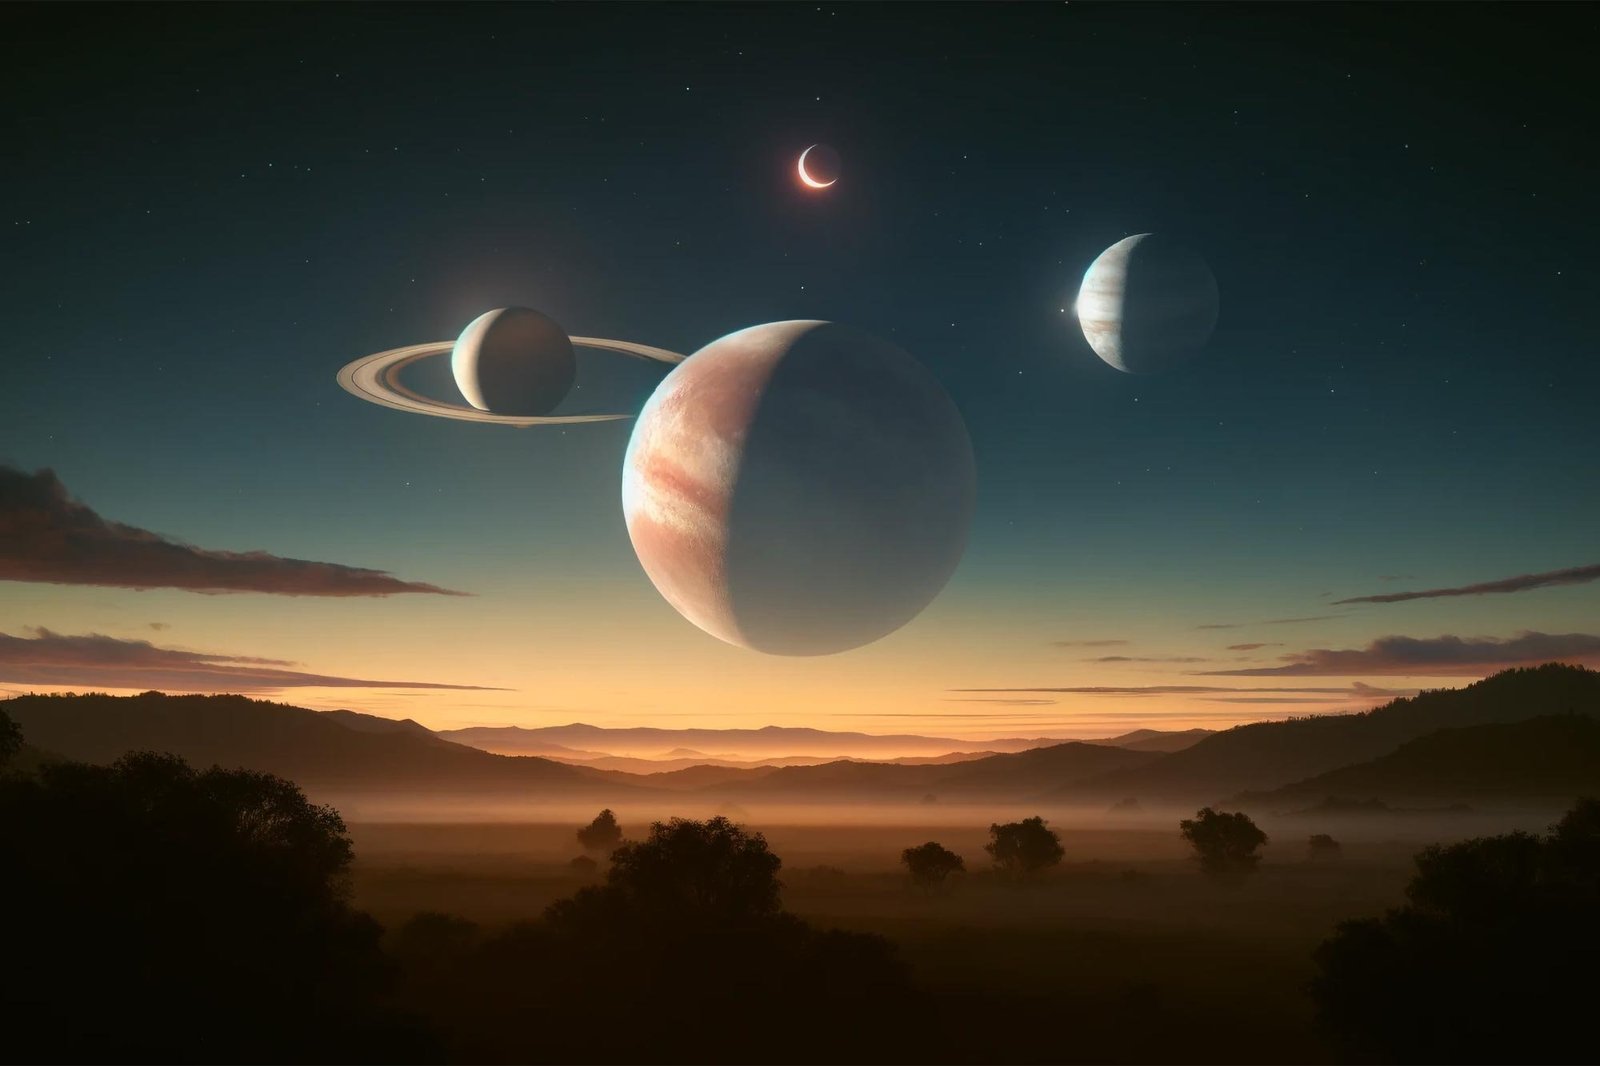 Planets Dominate the Morning Sky